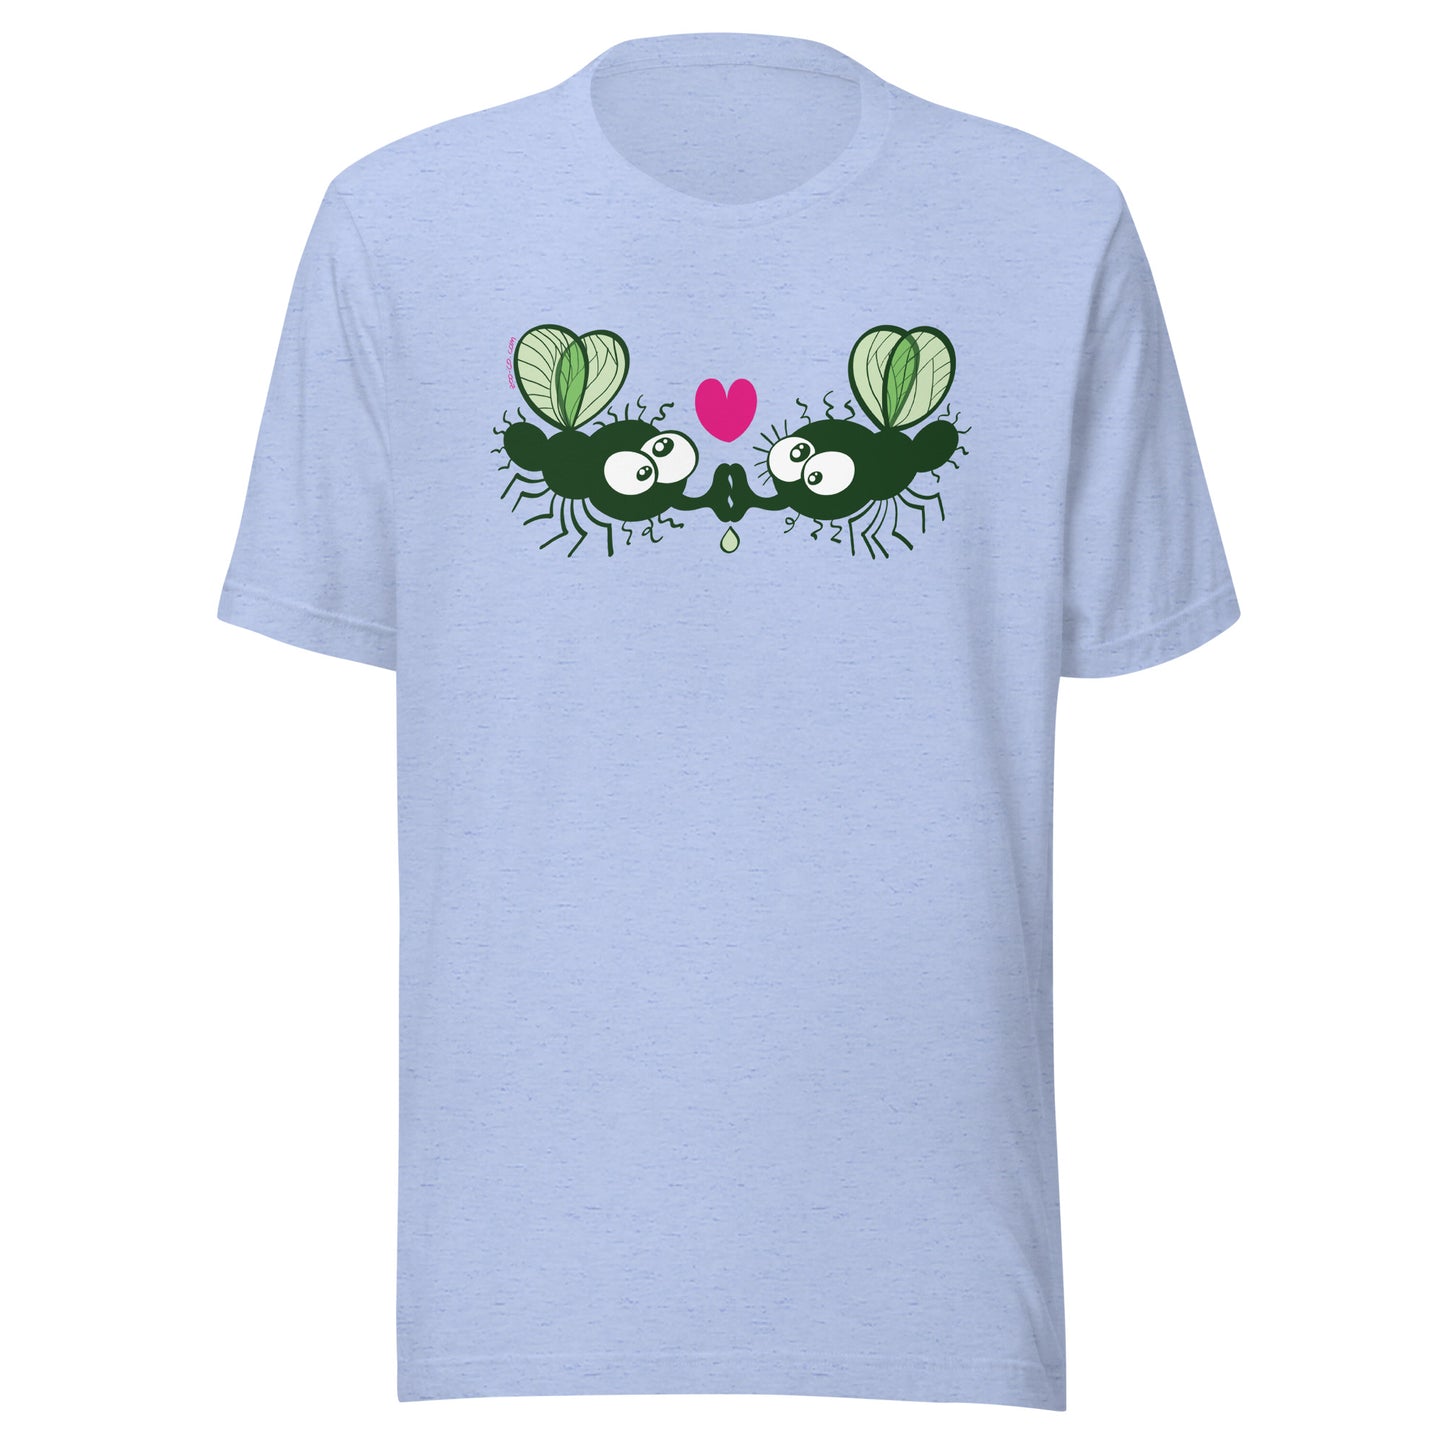 Funny houseflies kissing passionately Unisex t-shirt. Heather blue color. Front view